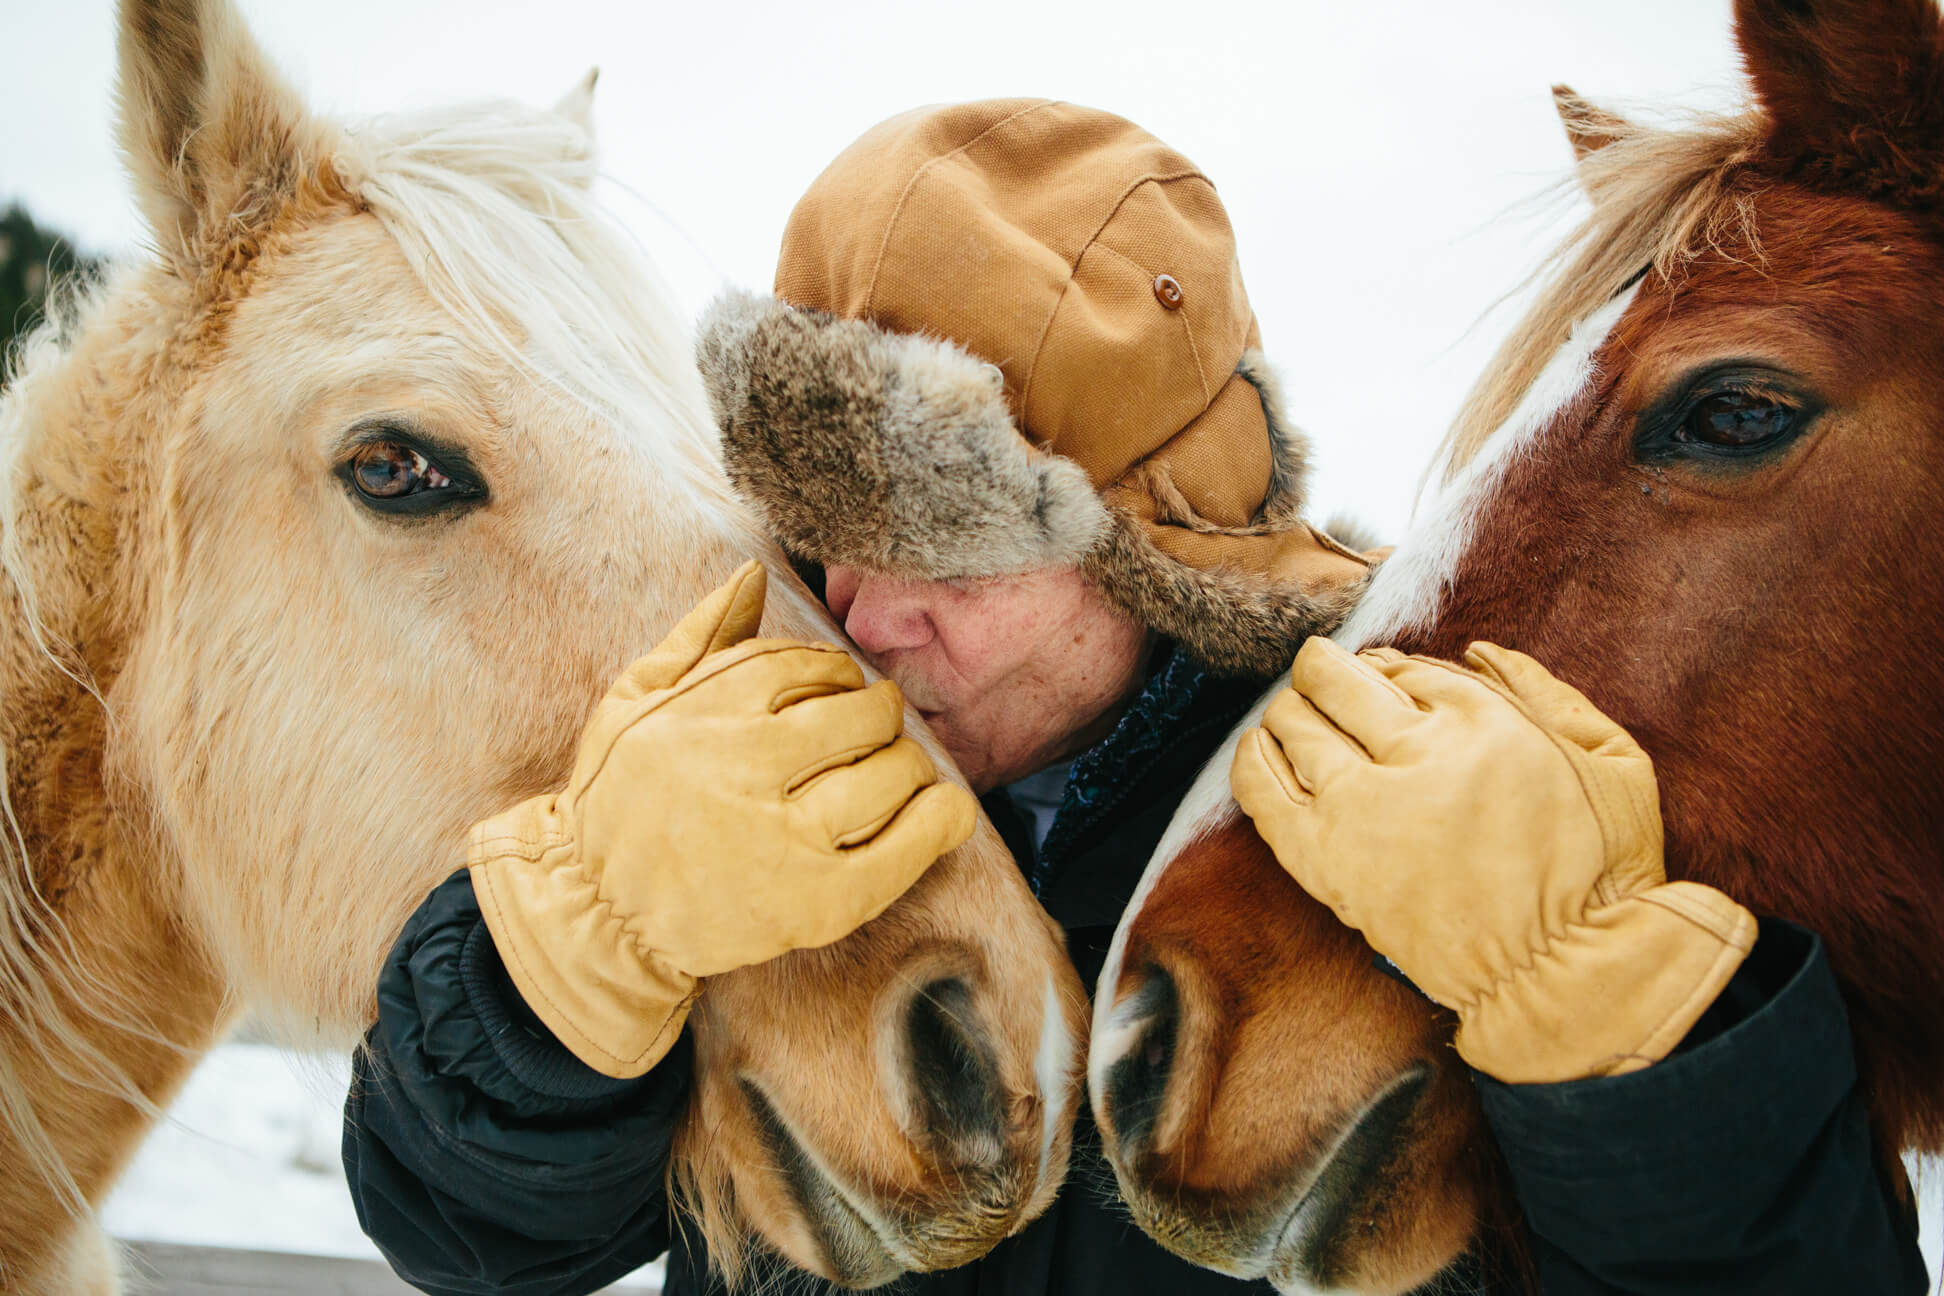 James Lee Burke kisses the nose of one of his horses at his home in Lolo Montana